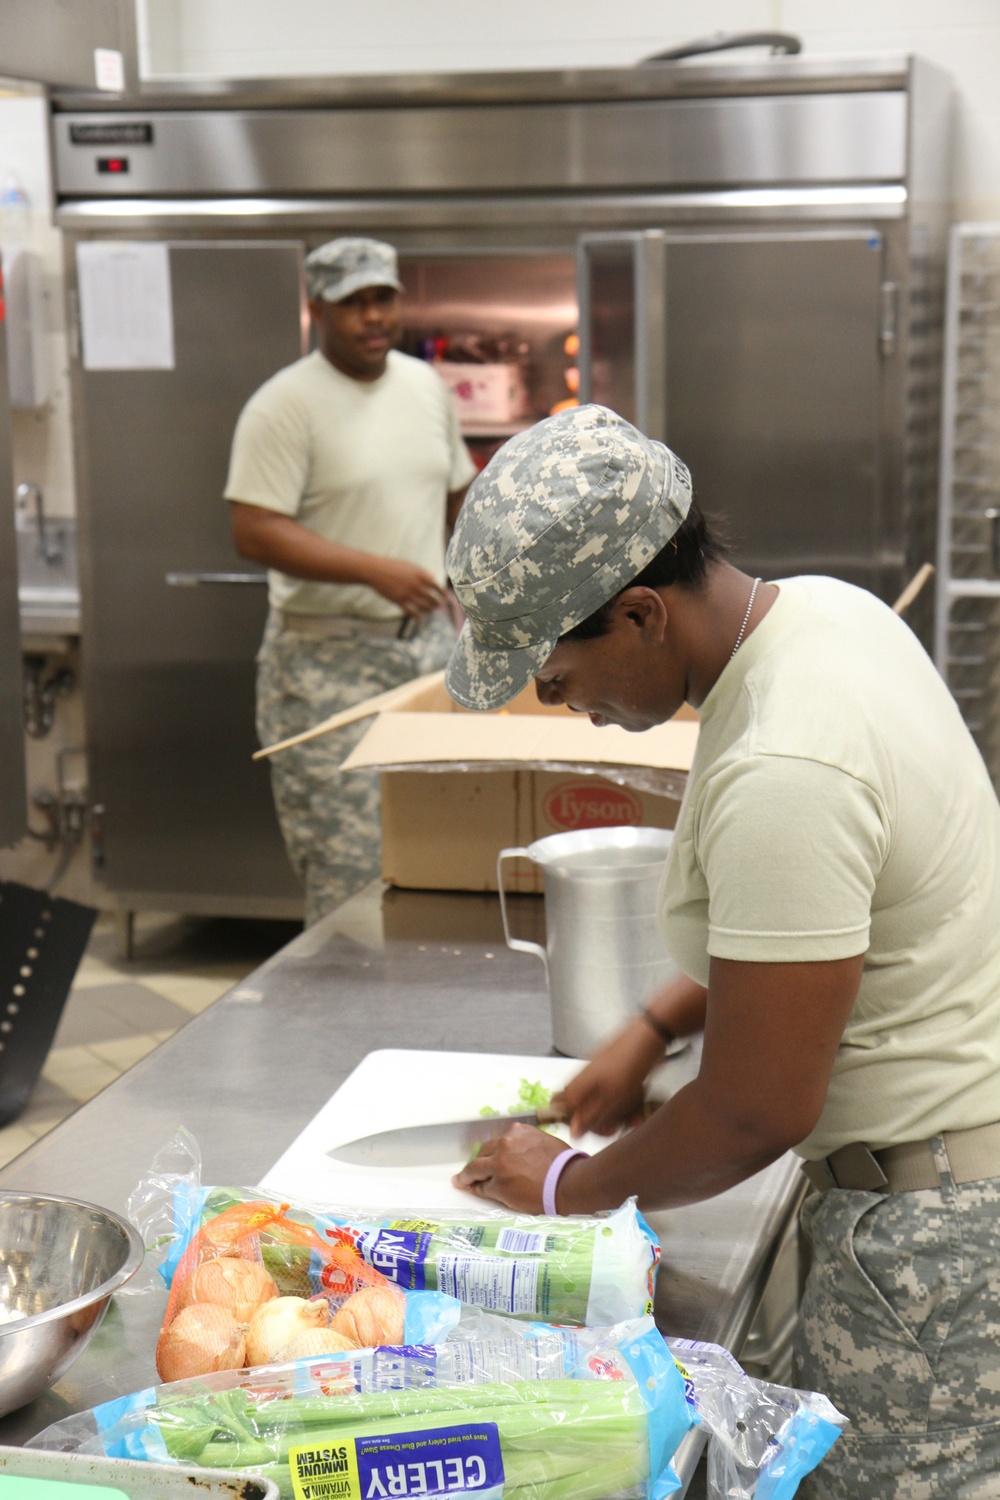 Cooking for service members at IRT in Norwich, NY